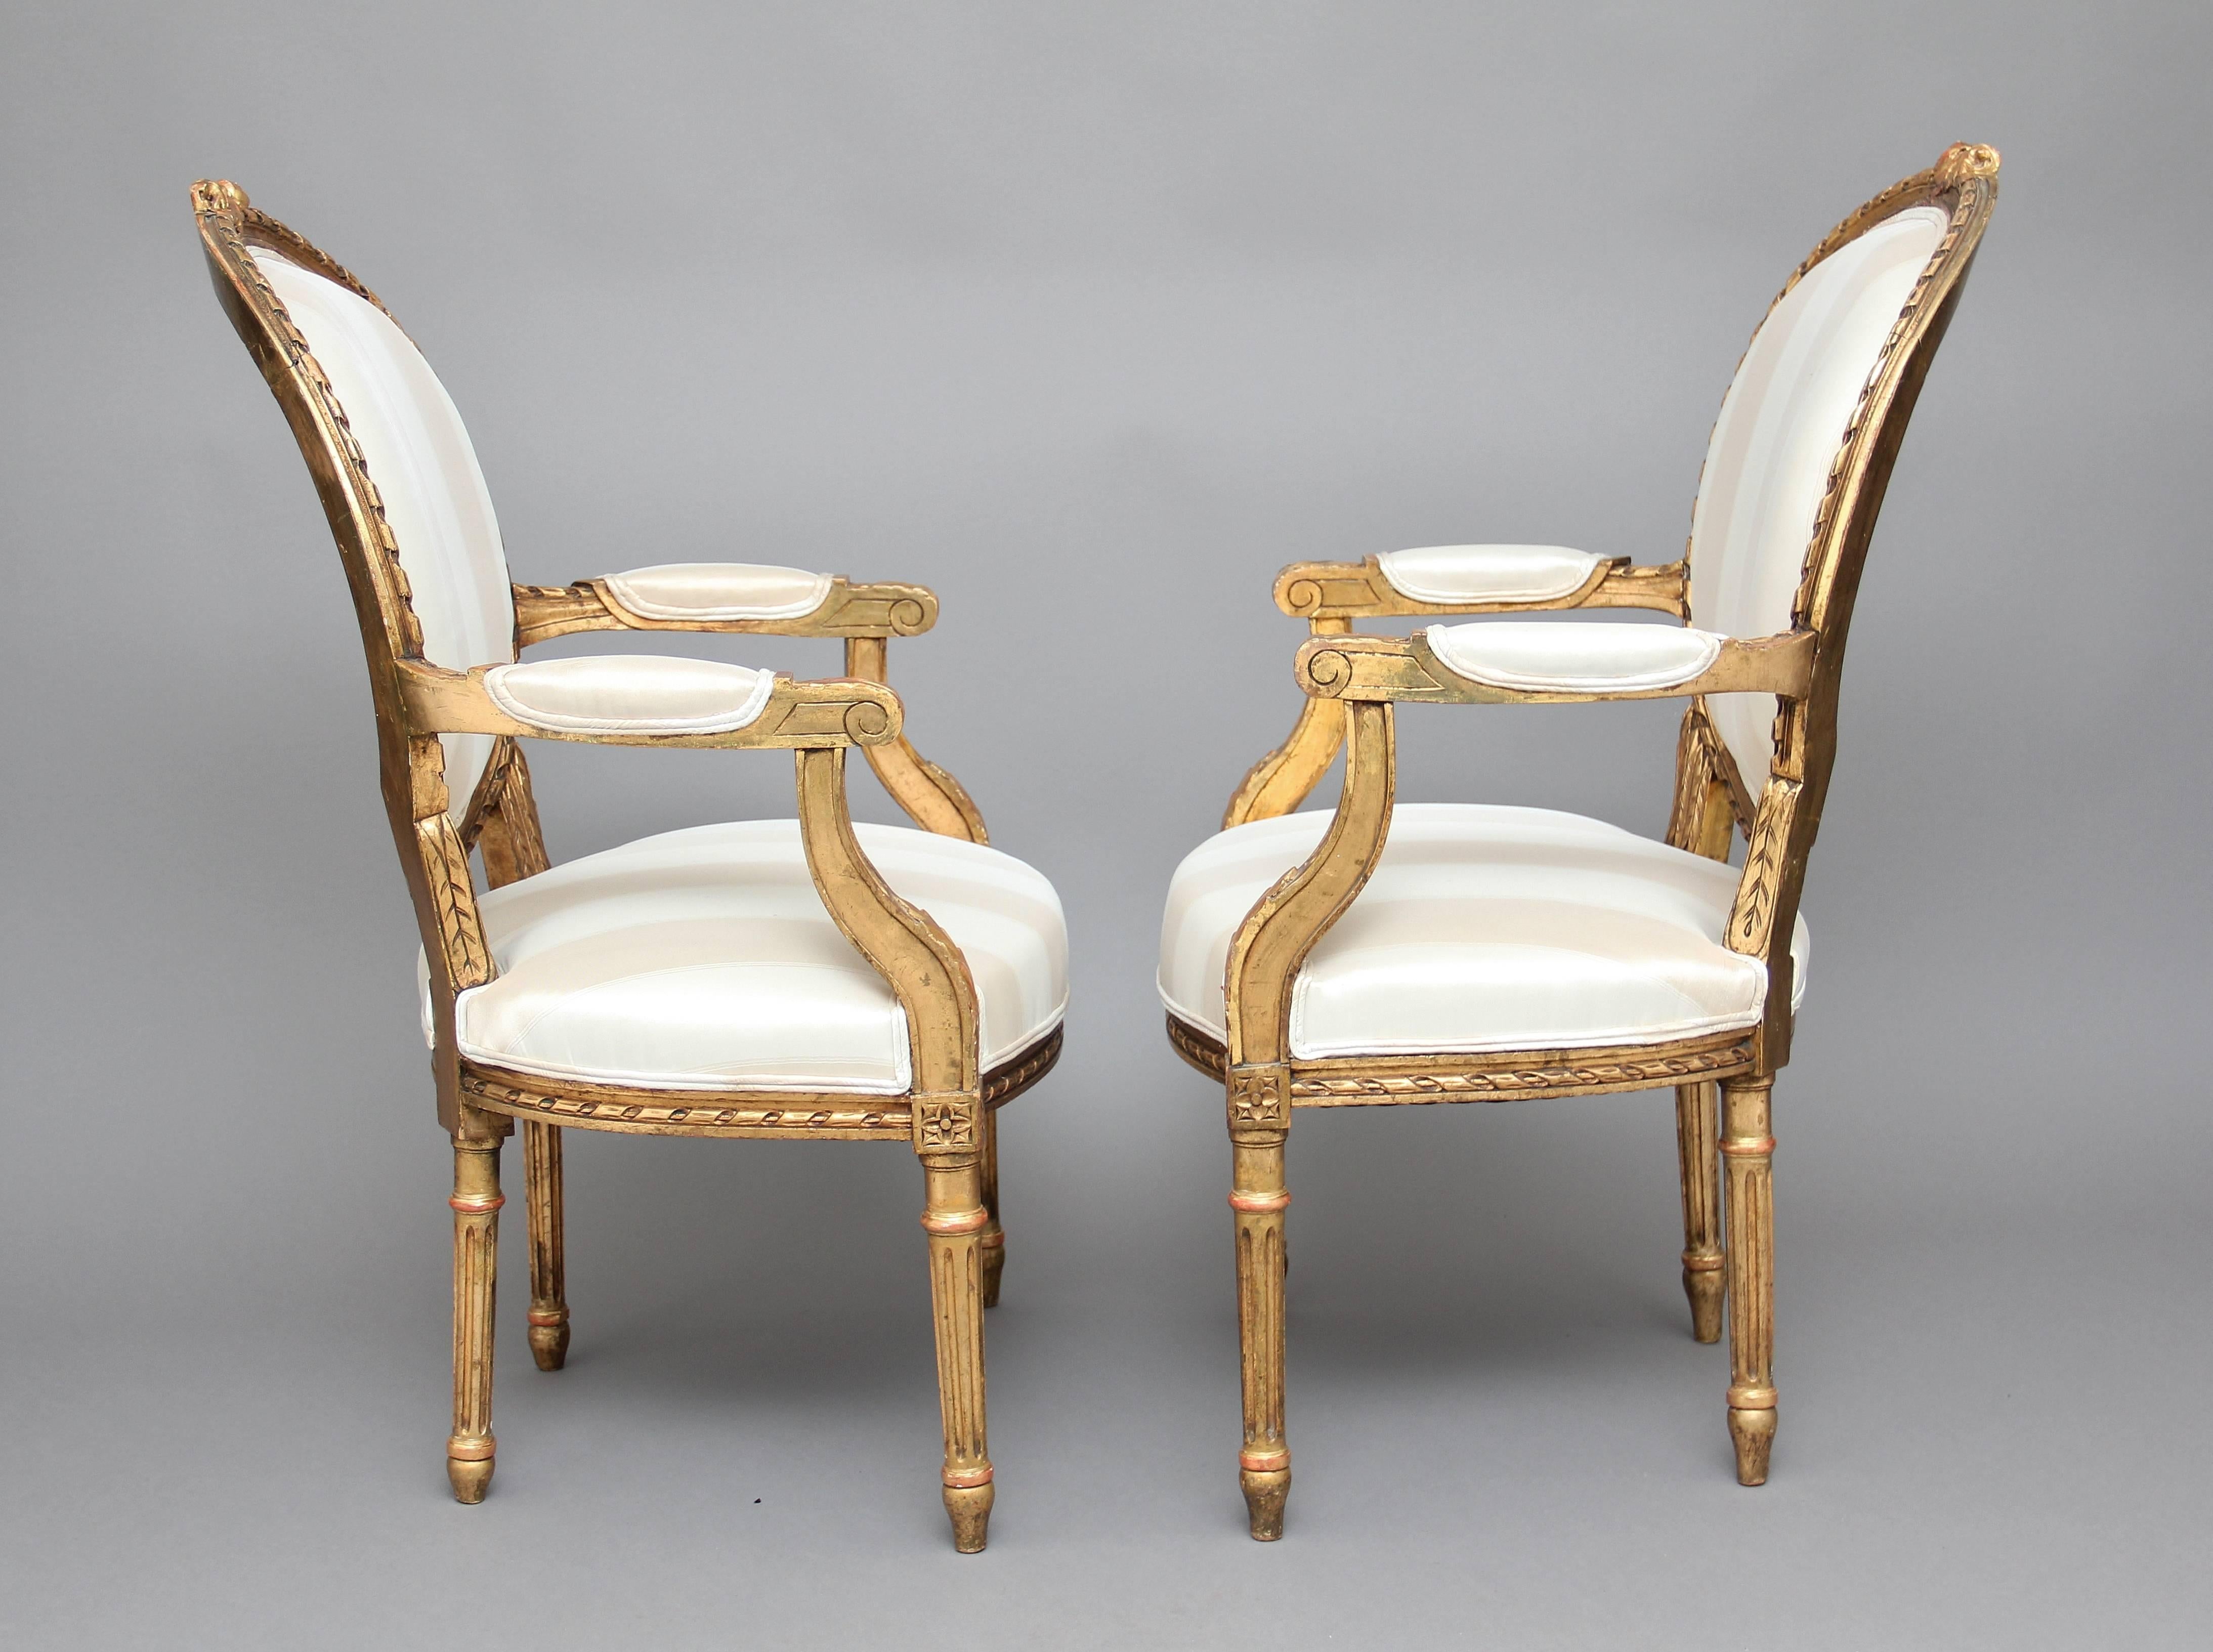 A nice pair of 19th century French giltwood and carved open armchairs, the oval padded backs with a carved frame and carved decoration at the top, padded arms with swept uprights decorated with acanthus leaf, the cream upholstered seat having a